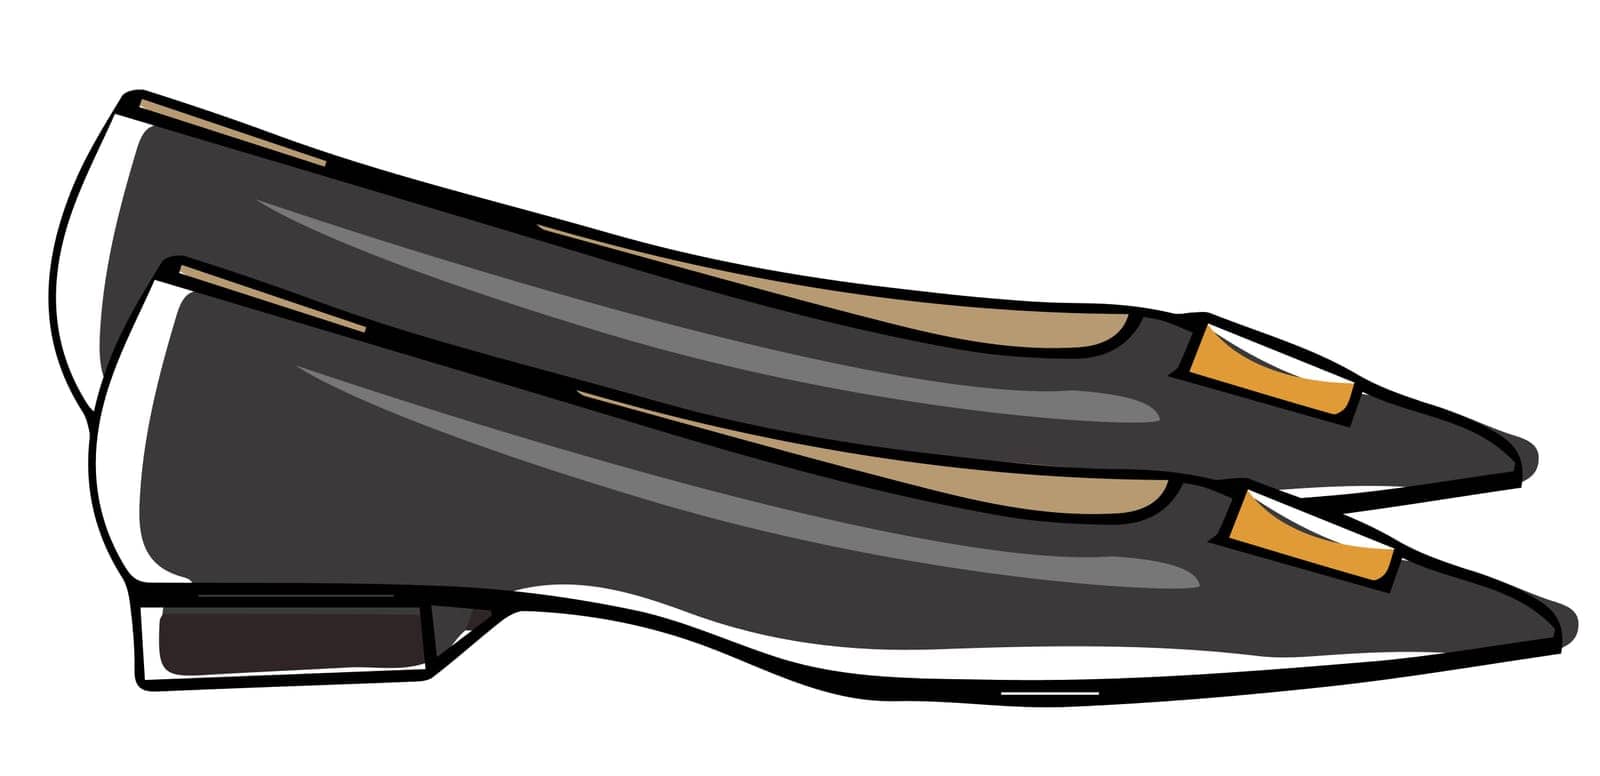 Leather shoes on flat platform for everyday use, isolated pair of footwear with decorative buckle. Accessories and clothes for women, casual look and trendy chic outfits. Vector illustration